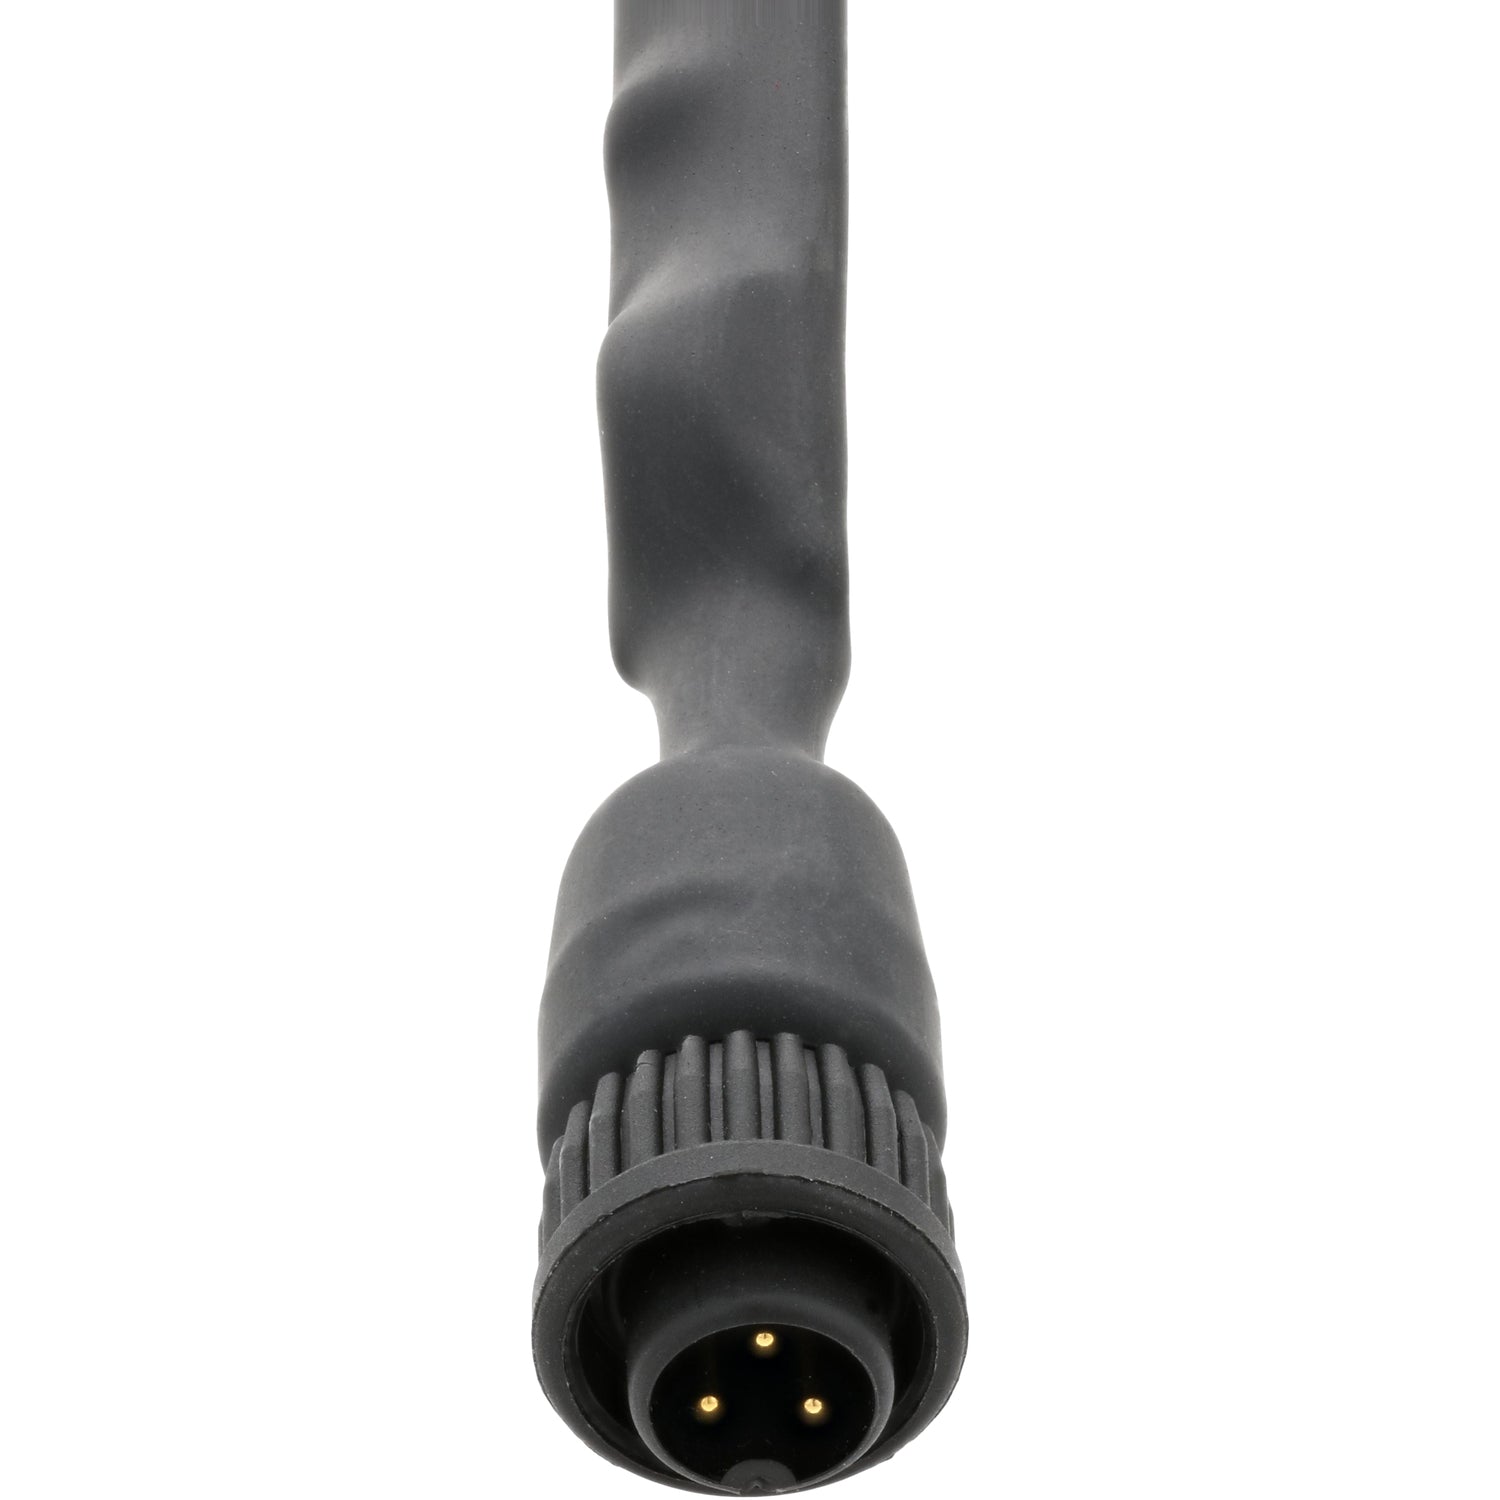 Black plastic female electrical connection shown on white background. 